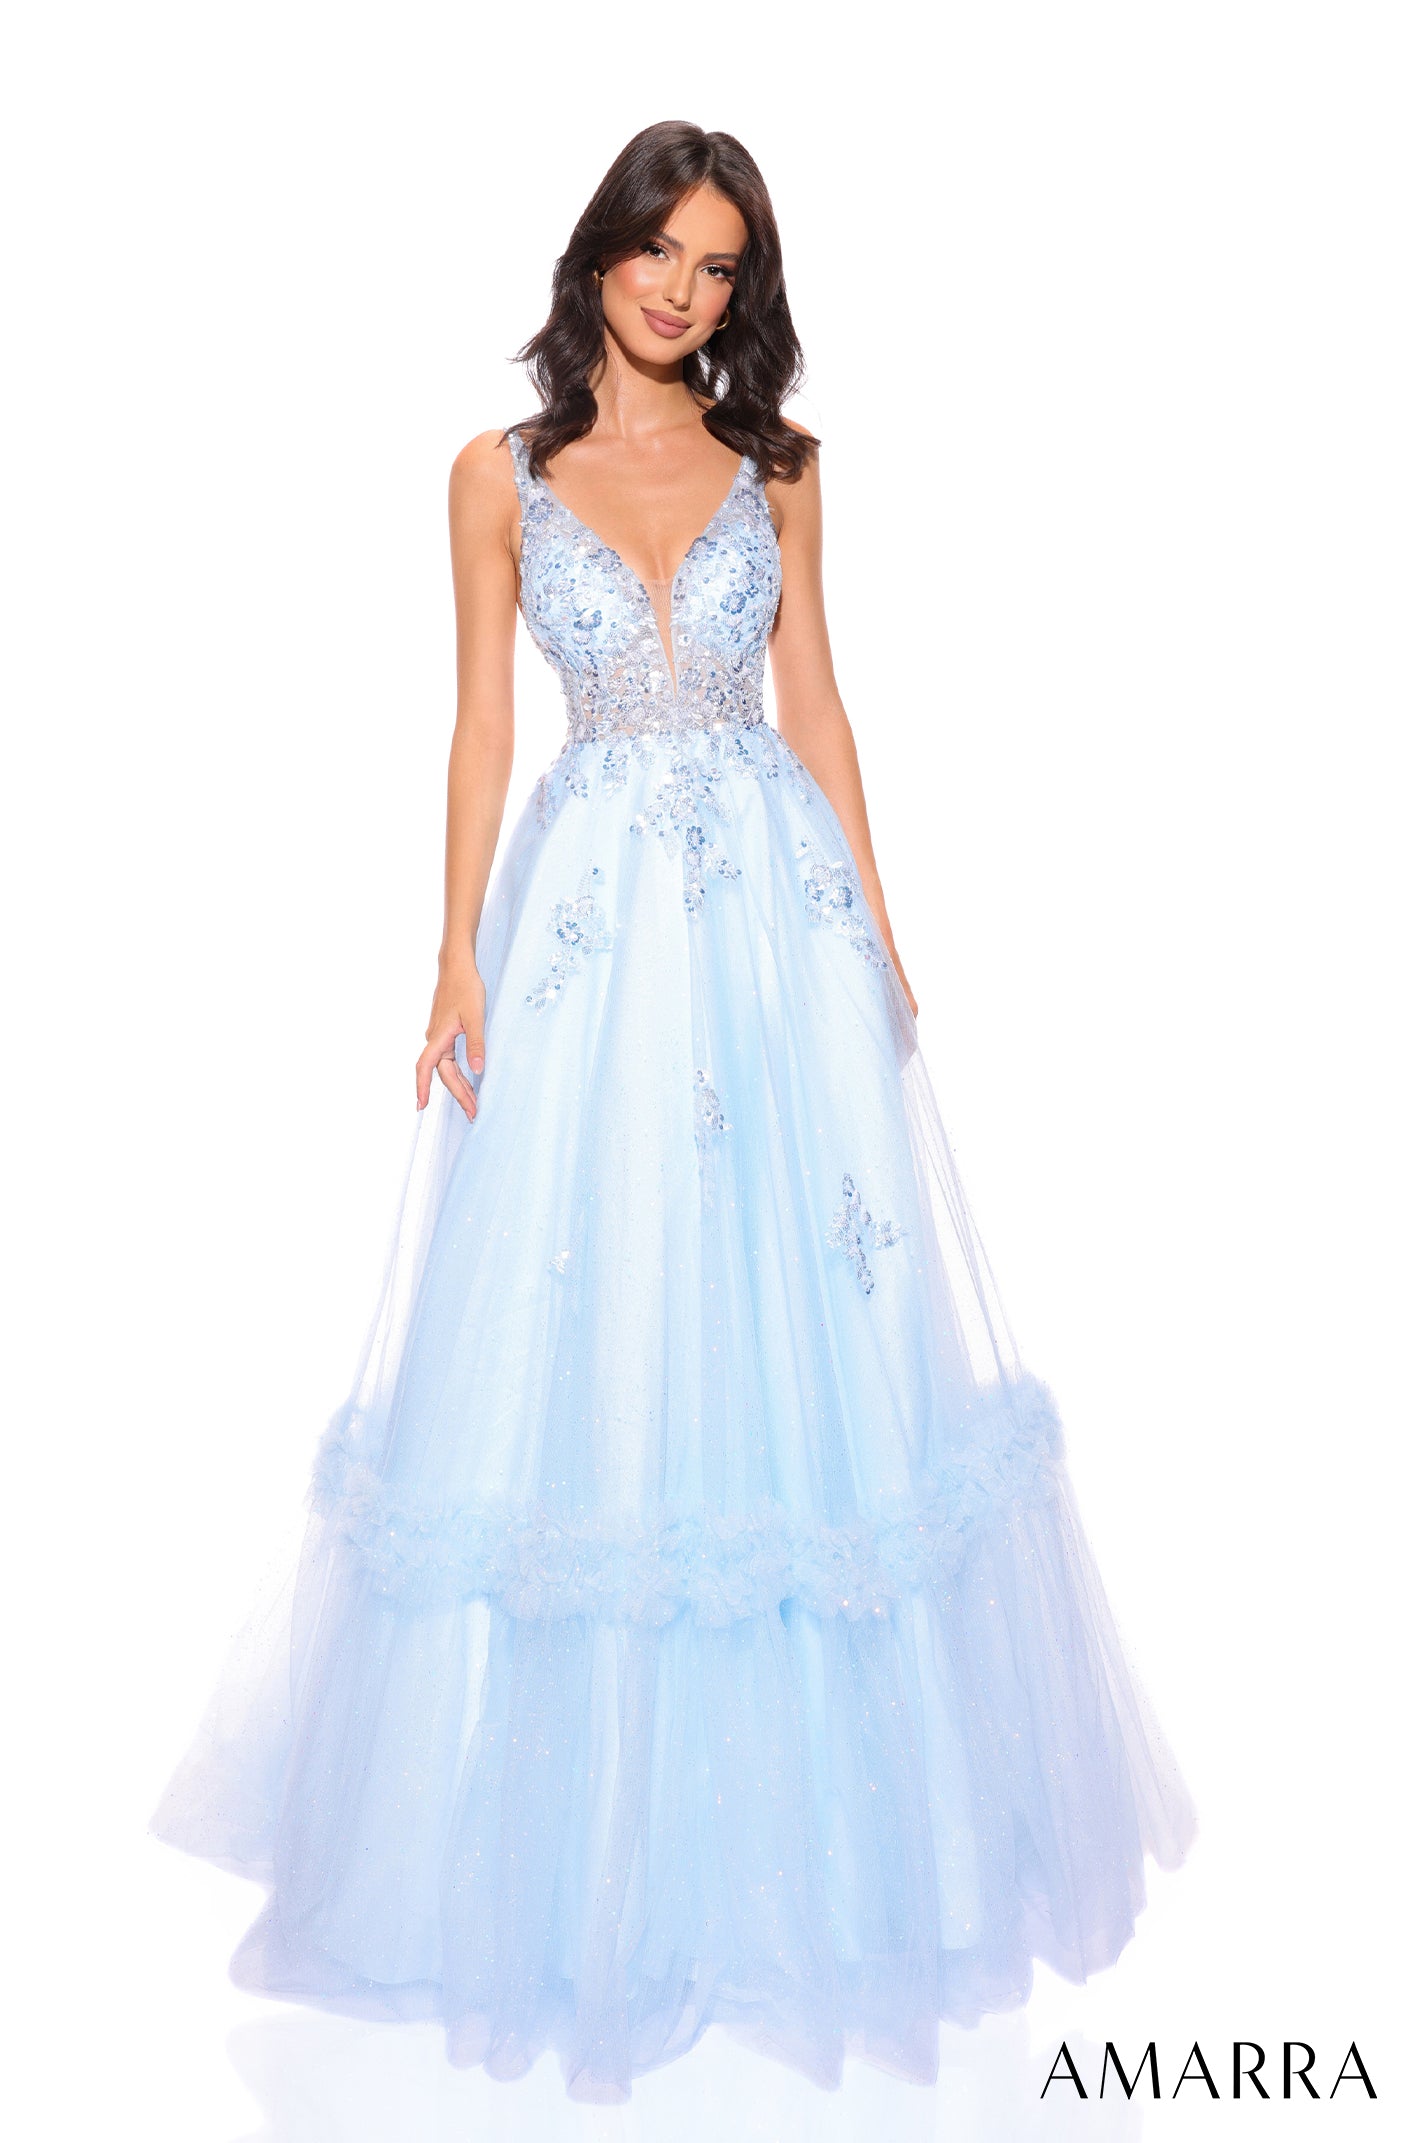 Elevate your formal look with the Amarra 88744 Long Shimmer Ballgown. This stunning dress features intricate sheer sequin detailing and a ruffled tulle A-line skirt that exudes elegance. Perfect for prom or any special occasion, this dress will make you stand out in style. Behold the exquisite prom dress that embodies a floral fantasy and stands as a true work of art.